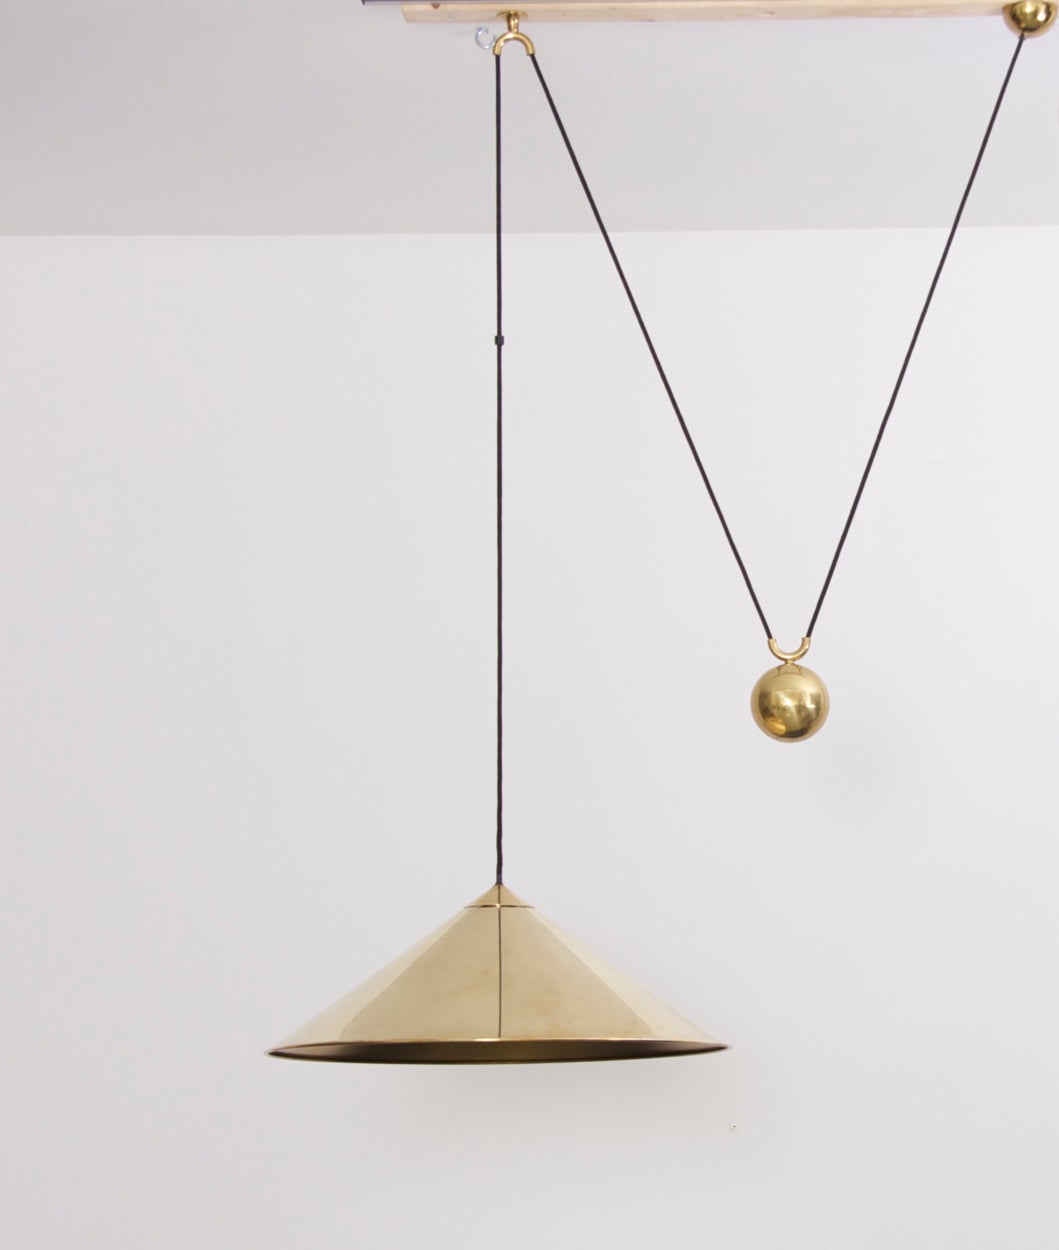 Rare large brass version of the Classic Schulz Keos pendant lamp in excellent condition with side counterweight. 1 x E27.